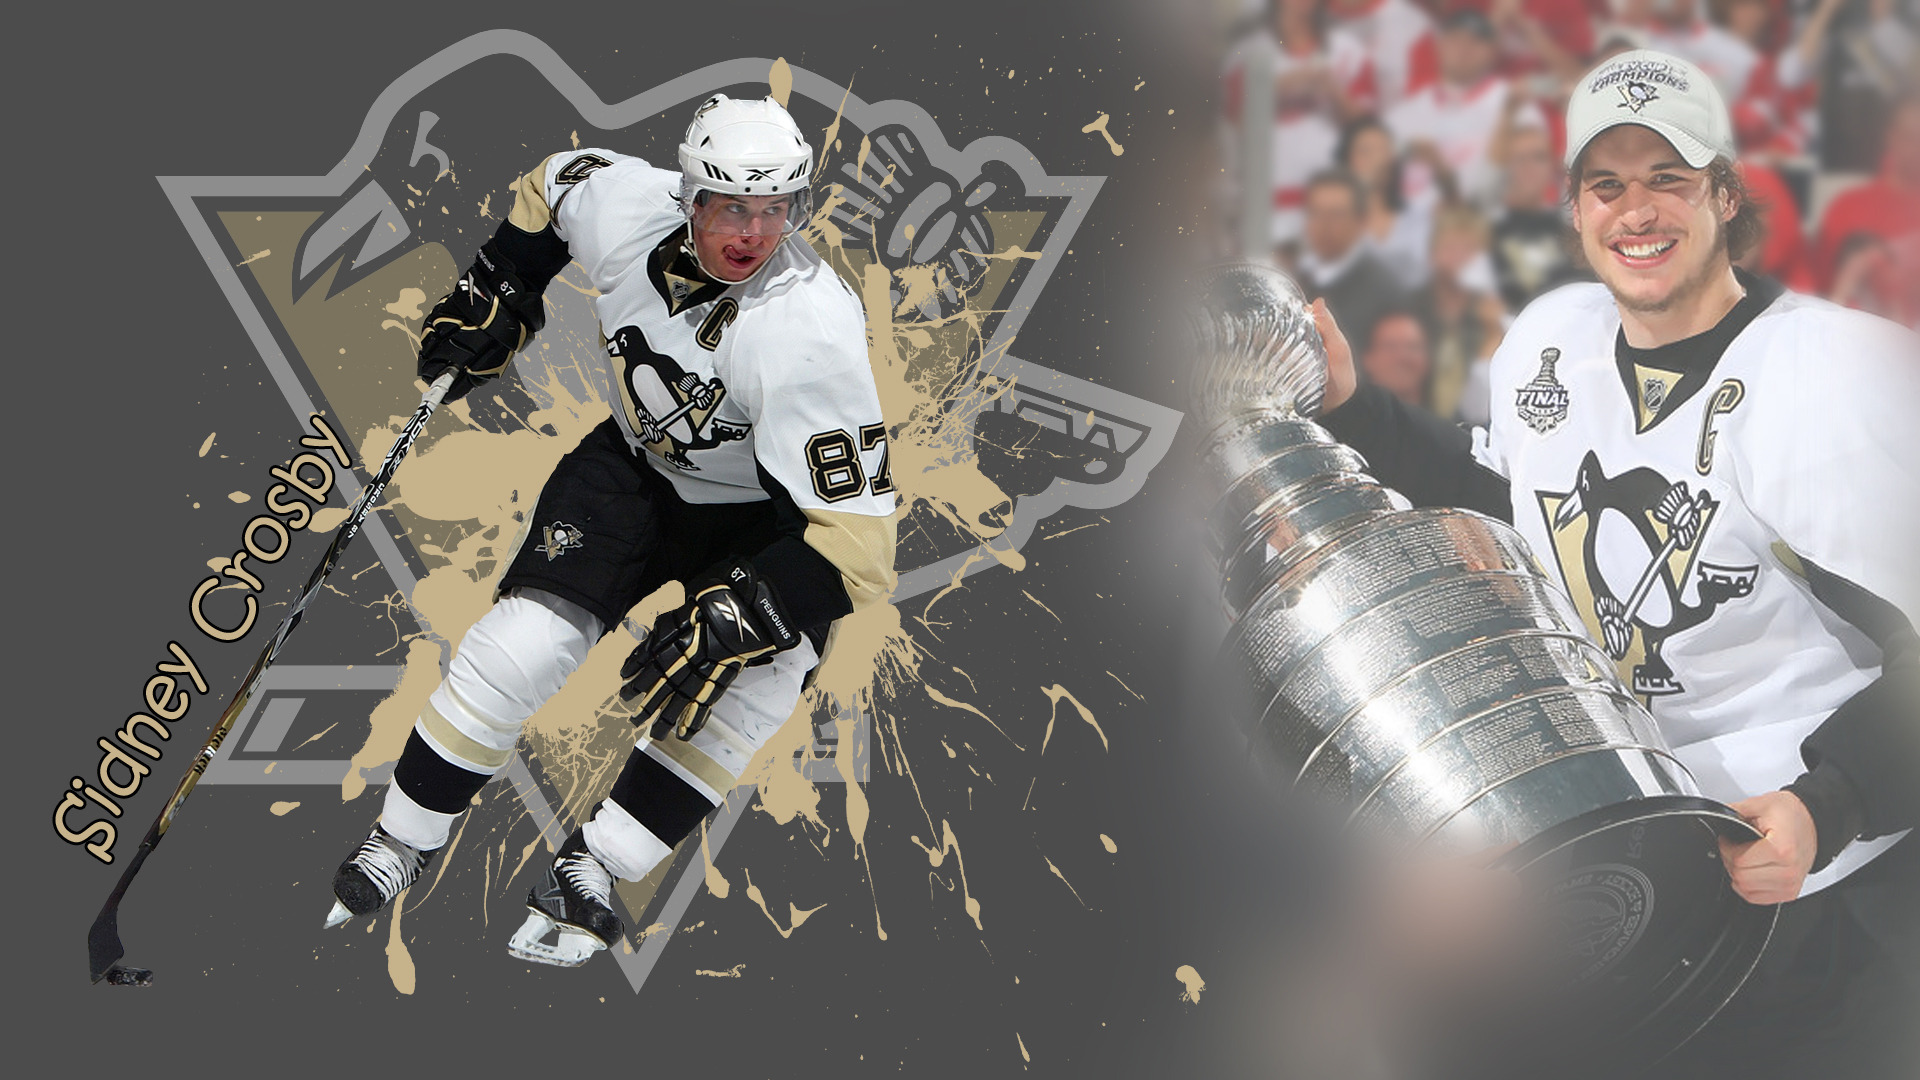 Wallpapers Sports - Leisures > Wallpapers Hockey Sidney Crosby by frankfou  - Hebus.com